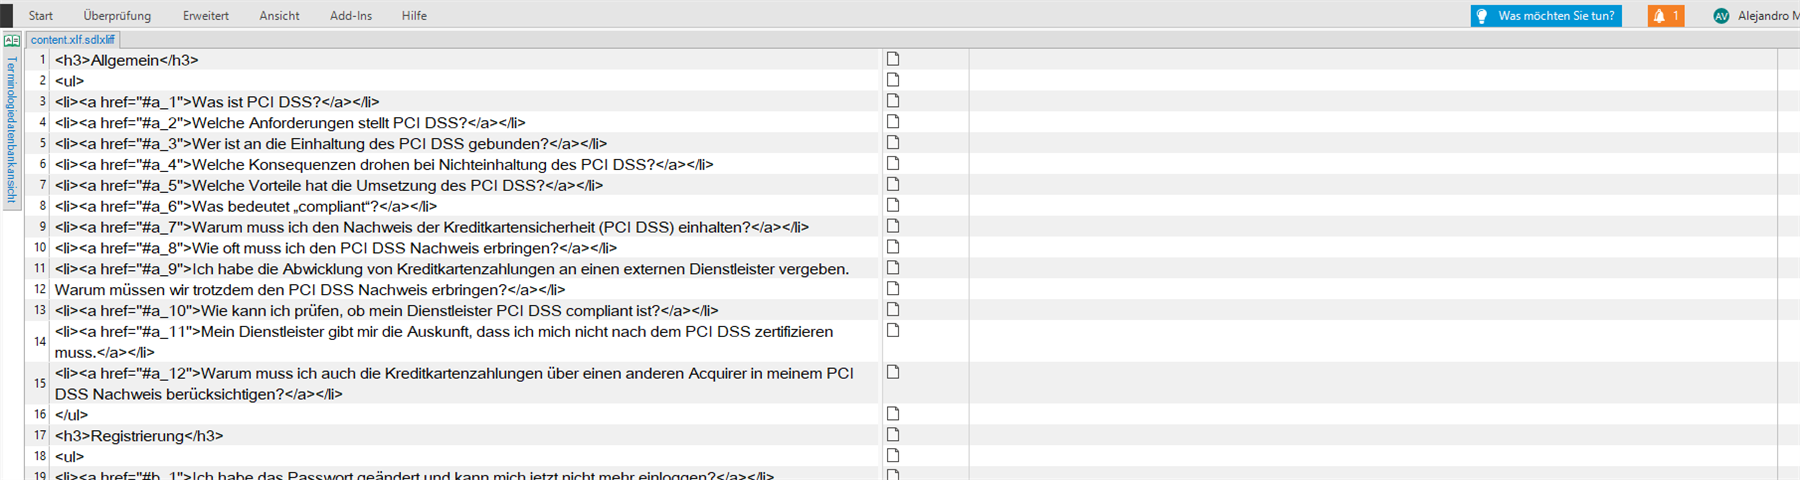 Screenshot of Trados Studio software showing a list of hyperlinked questions in German related to PCI DSS compliance within an HTML file.